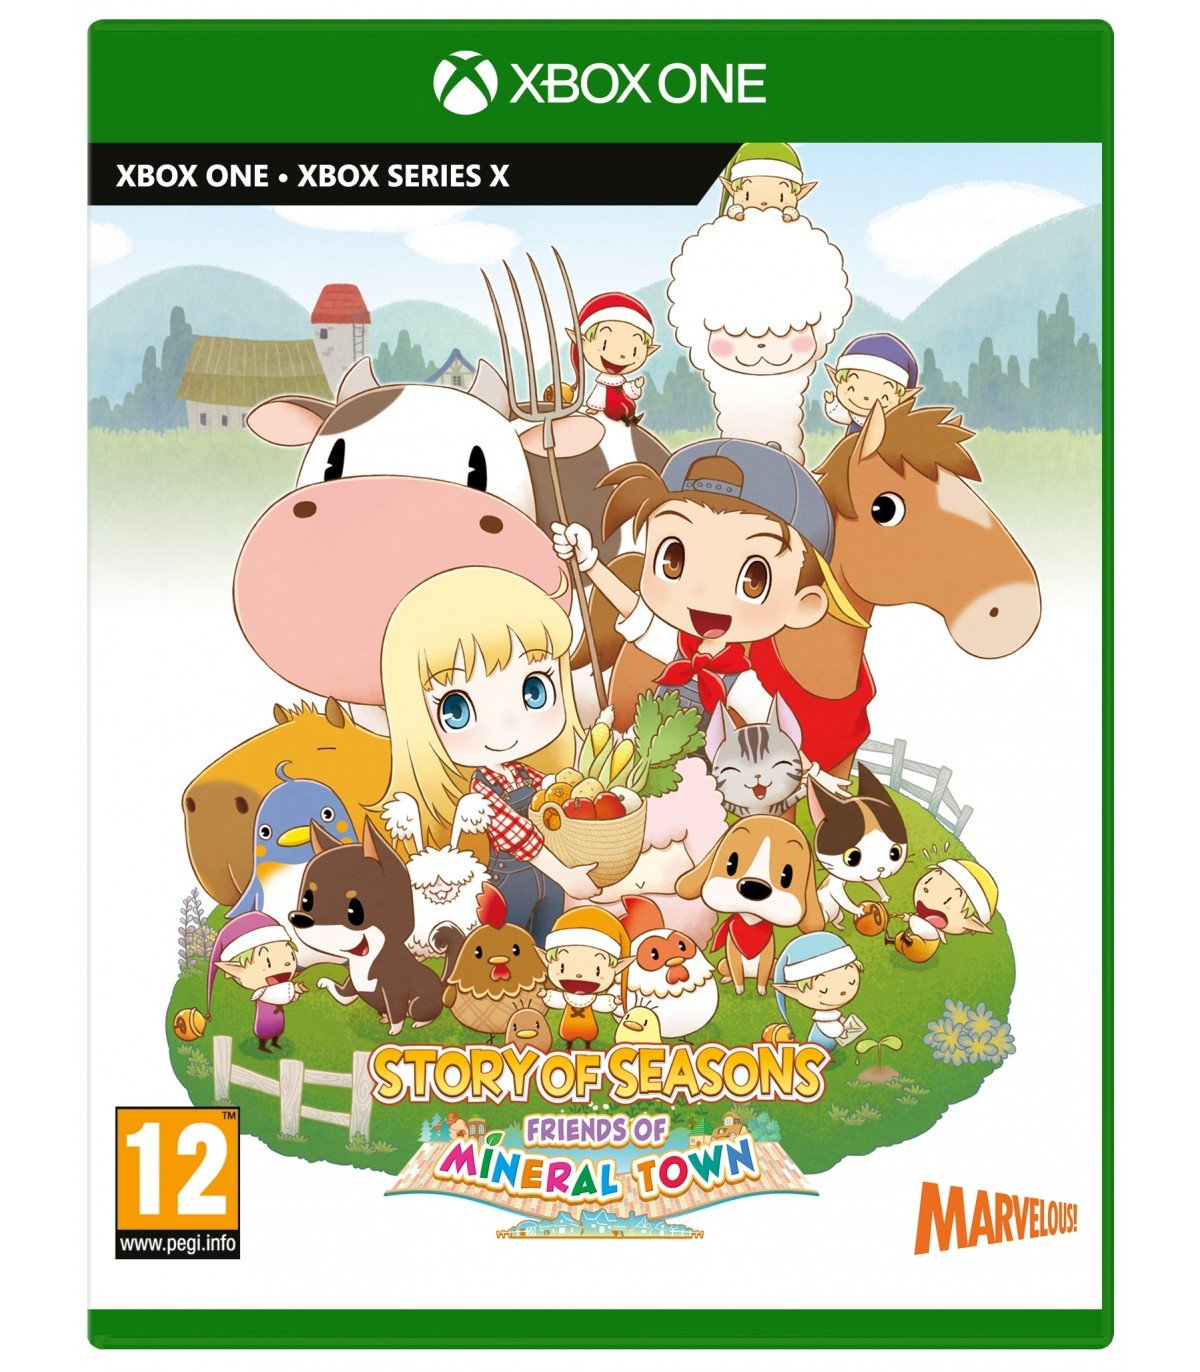 Story of Seasons: Friends Of Mineral Town, Marvelous